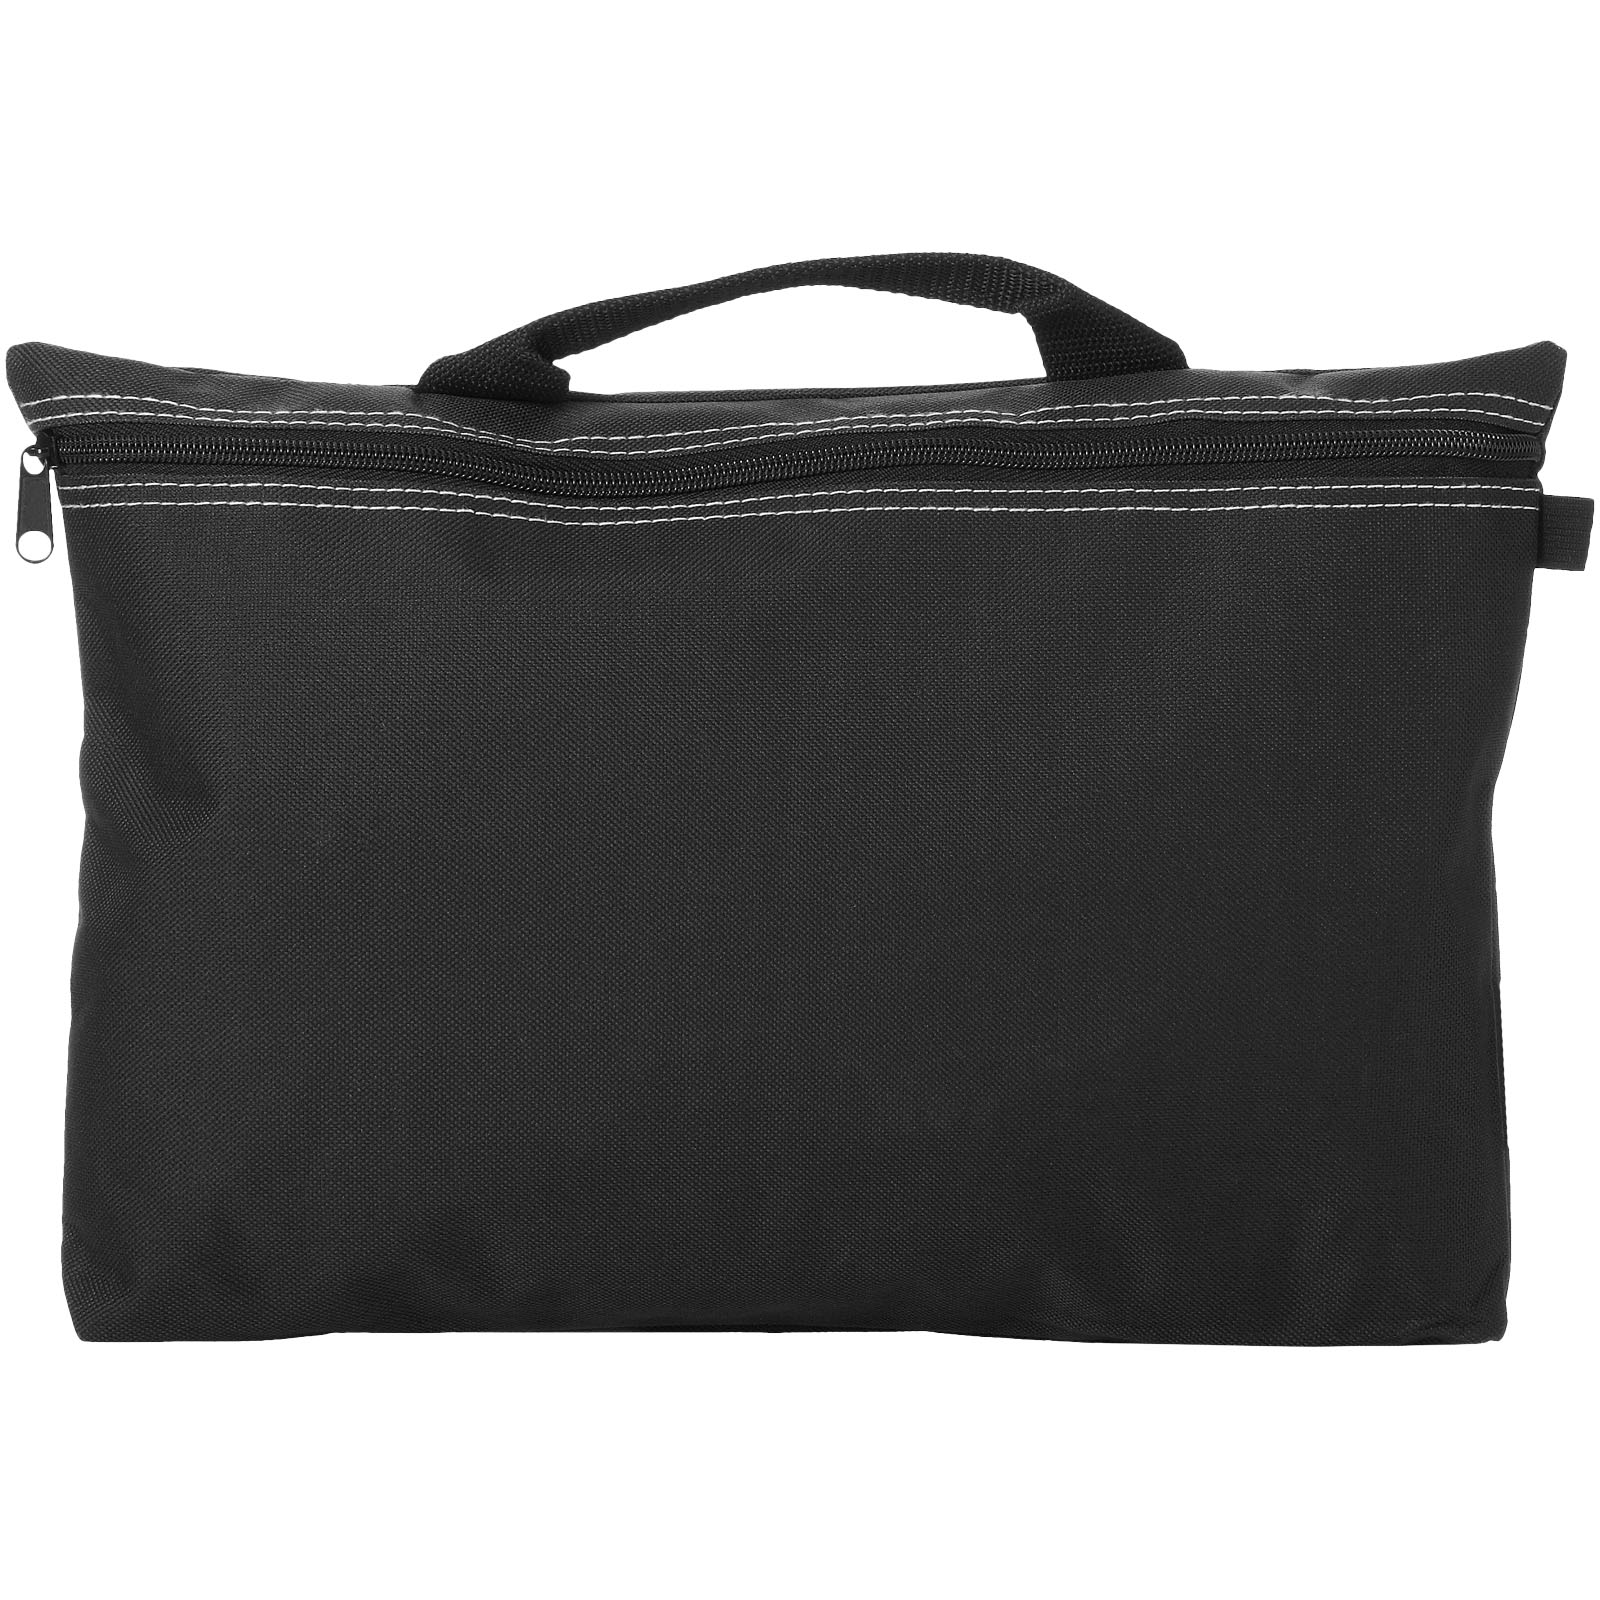 Advertising Conference bags - Orlando conference bag 3L - 1